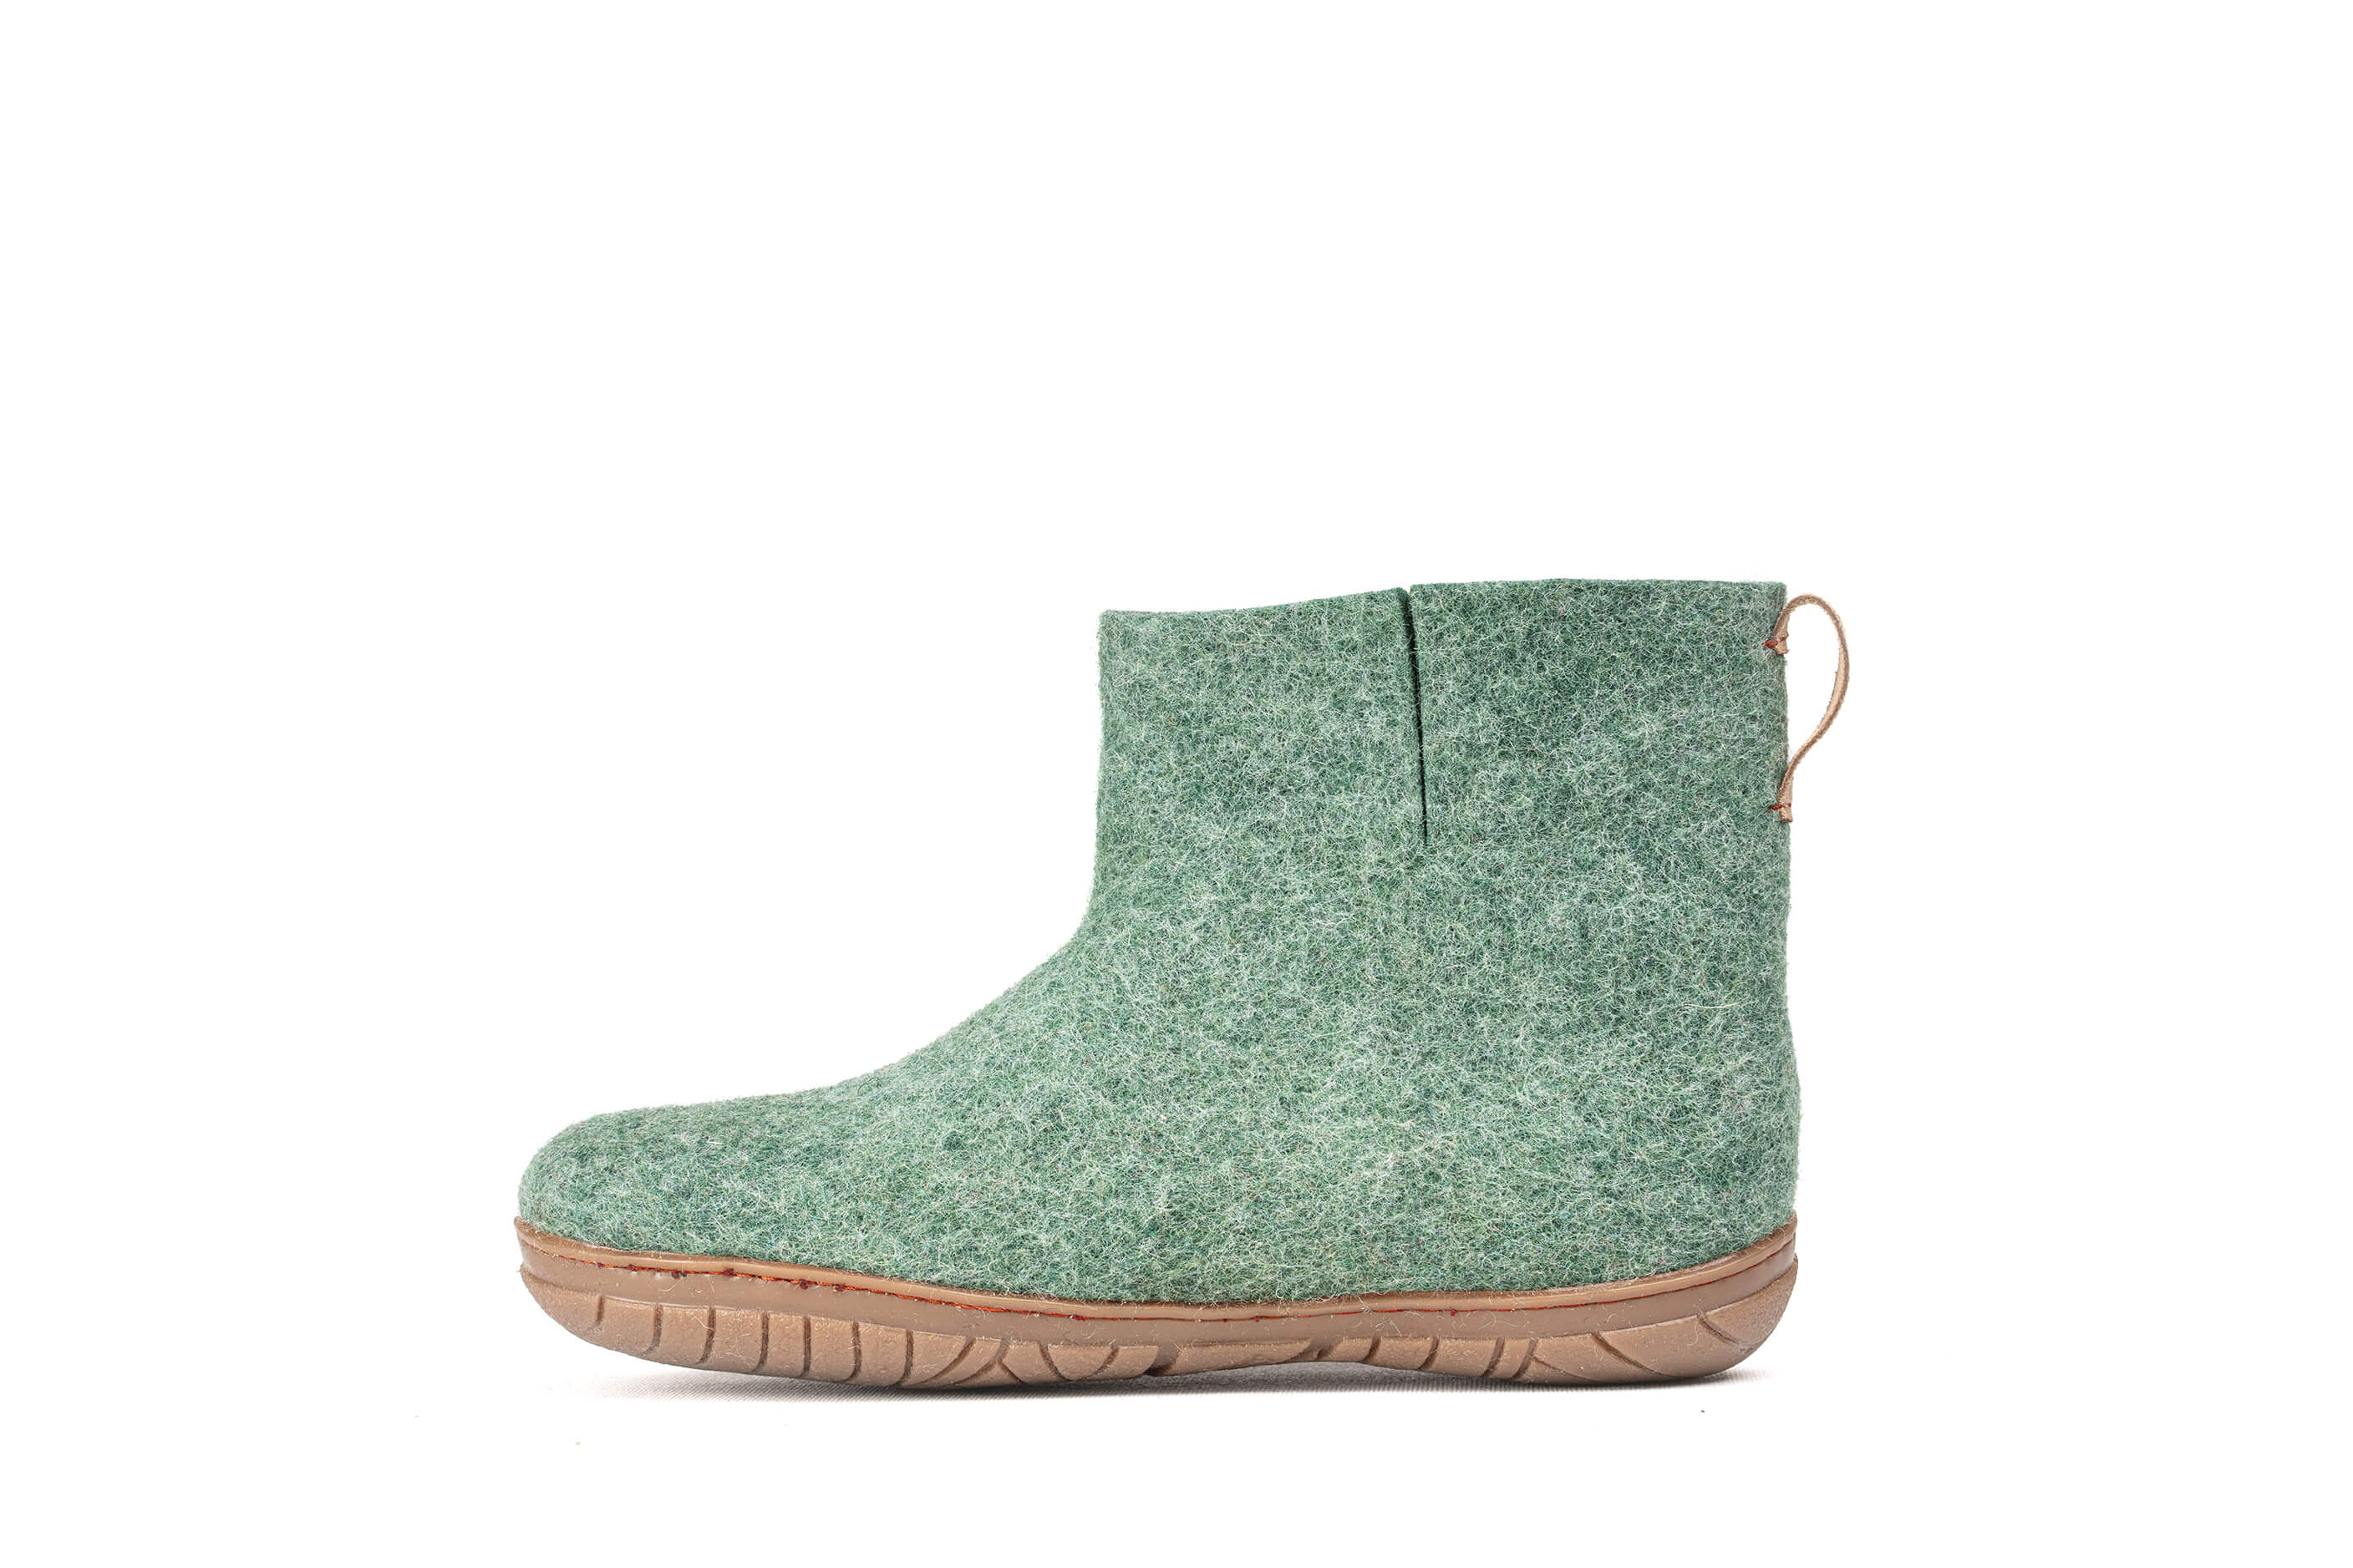 Outdoor Low Boots With Rubber Sole - Jungle Green